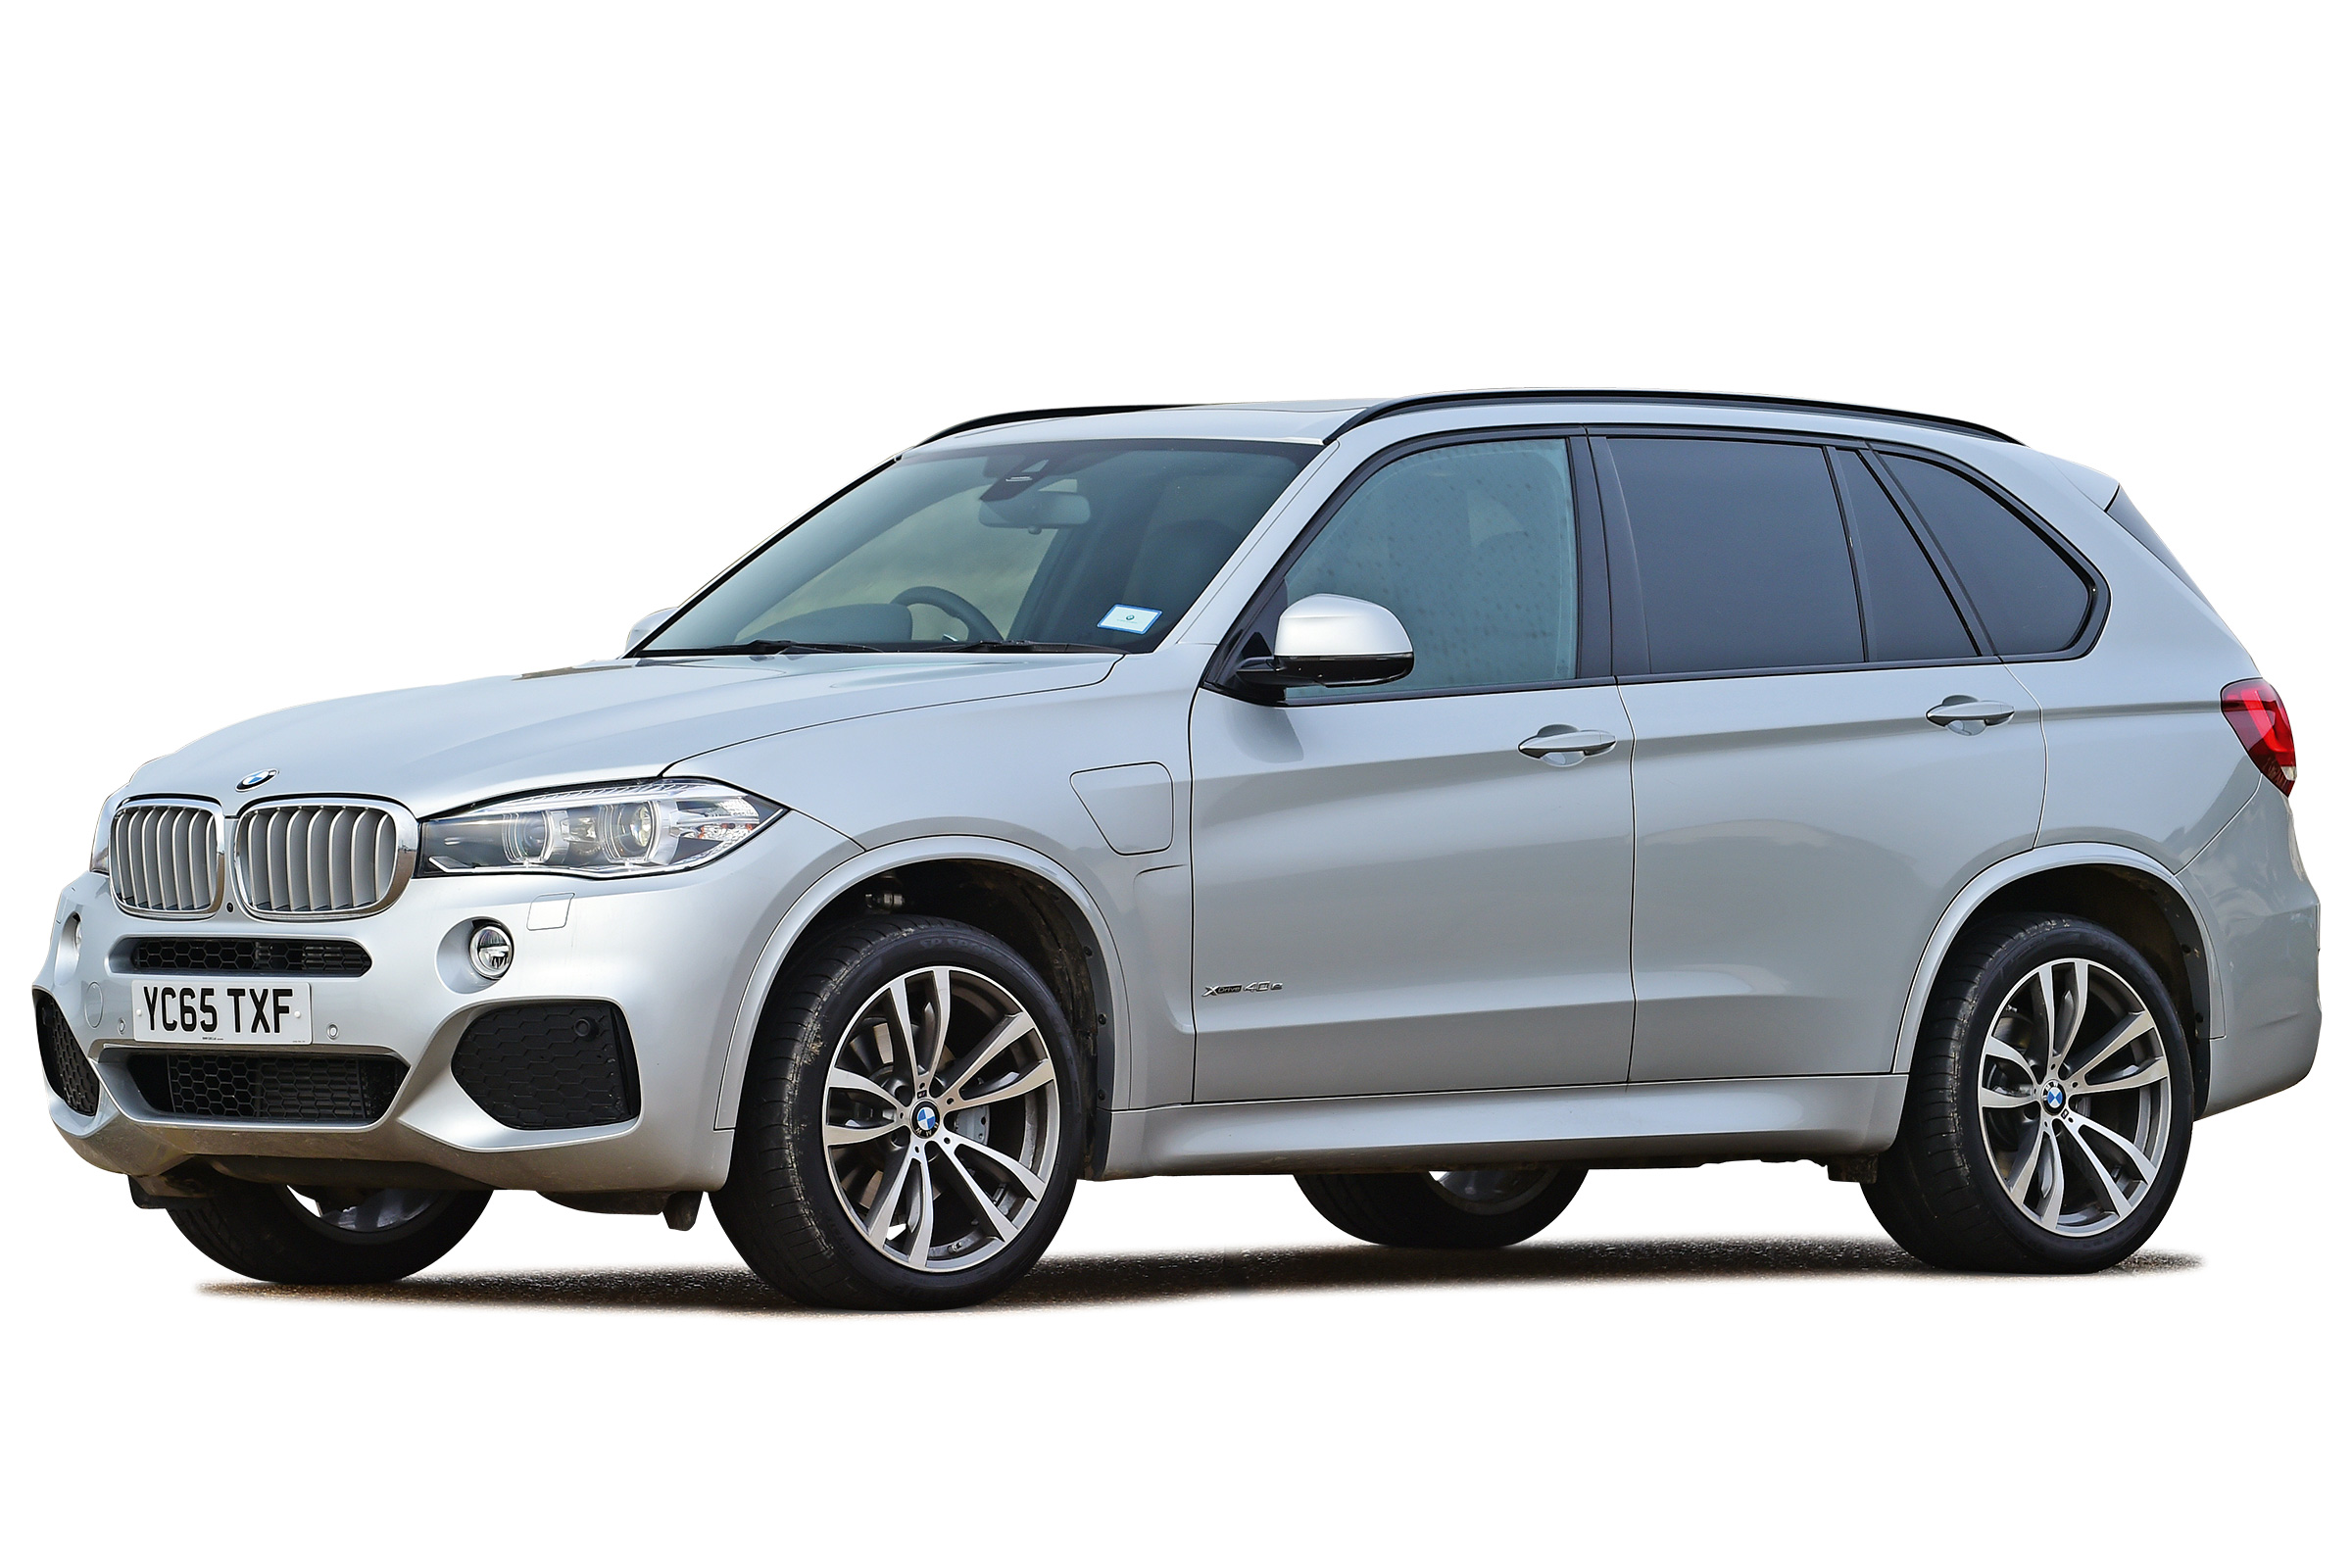 Bmw X5 Suv 14 18 Owner Reviews Mpg Problems Reliability Carbuyer